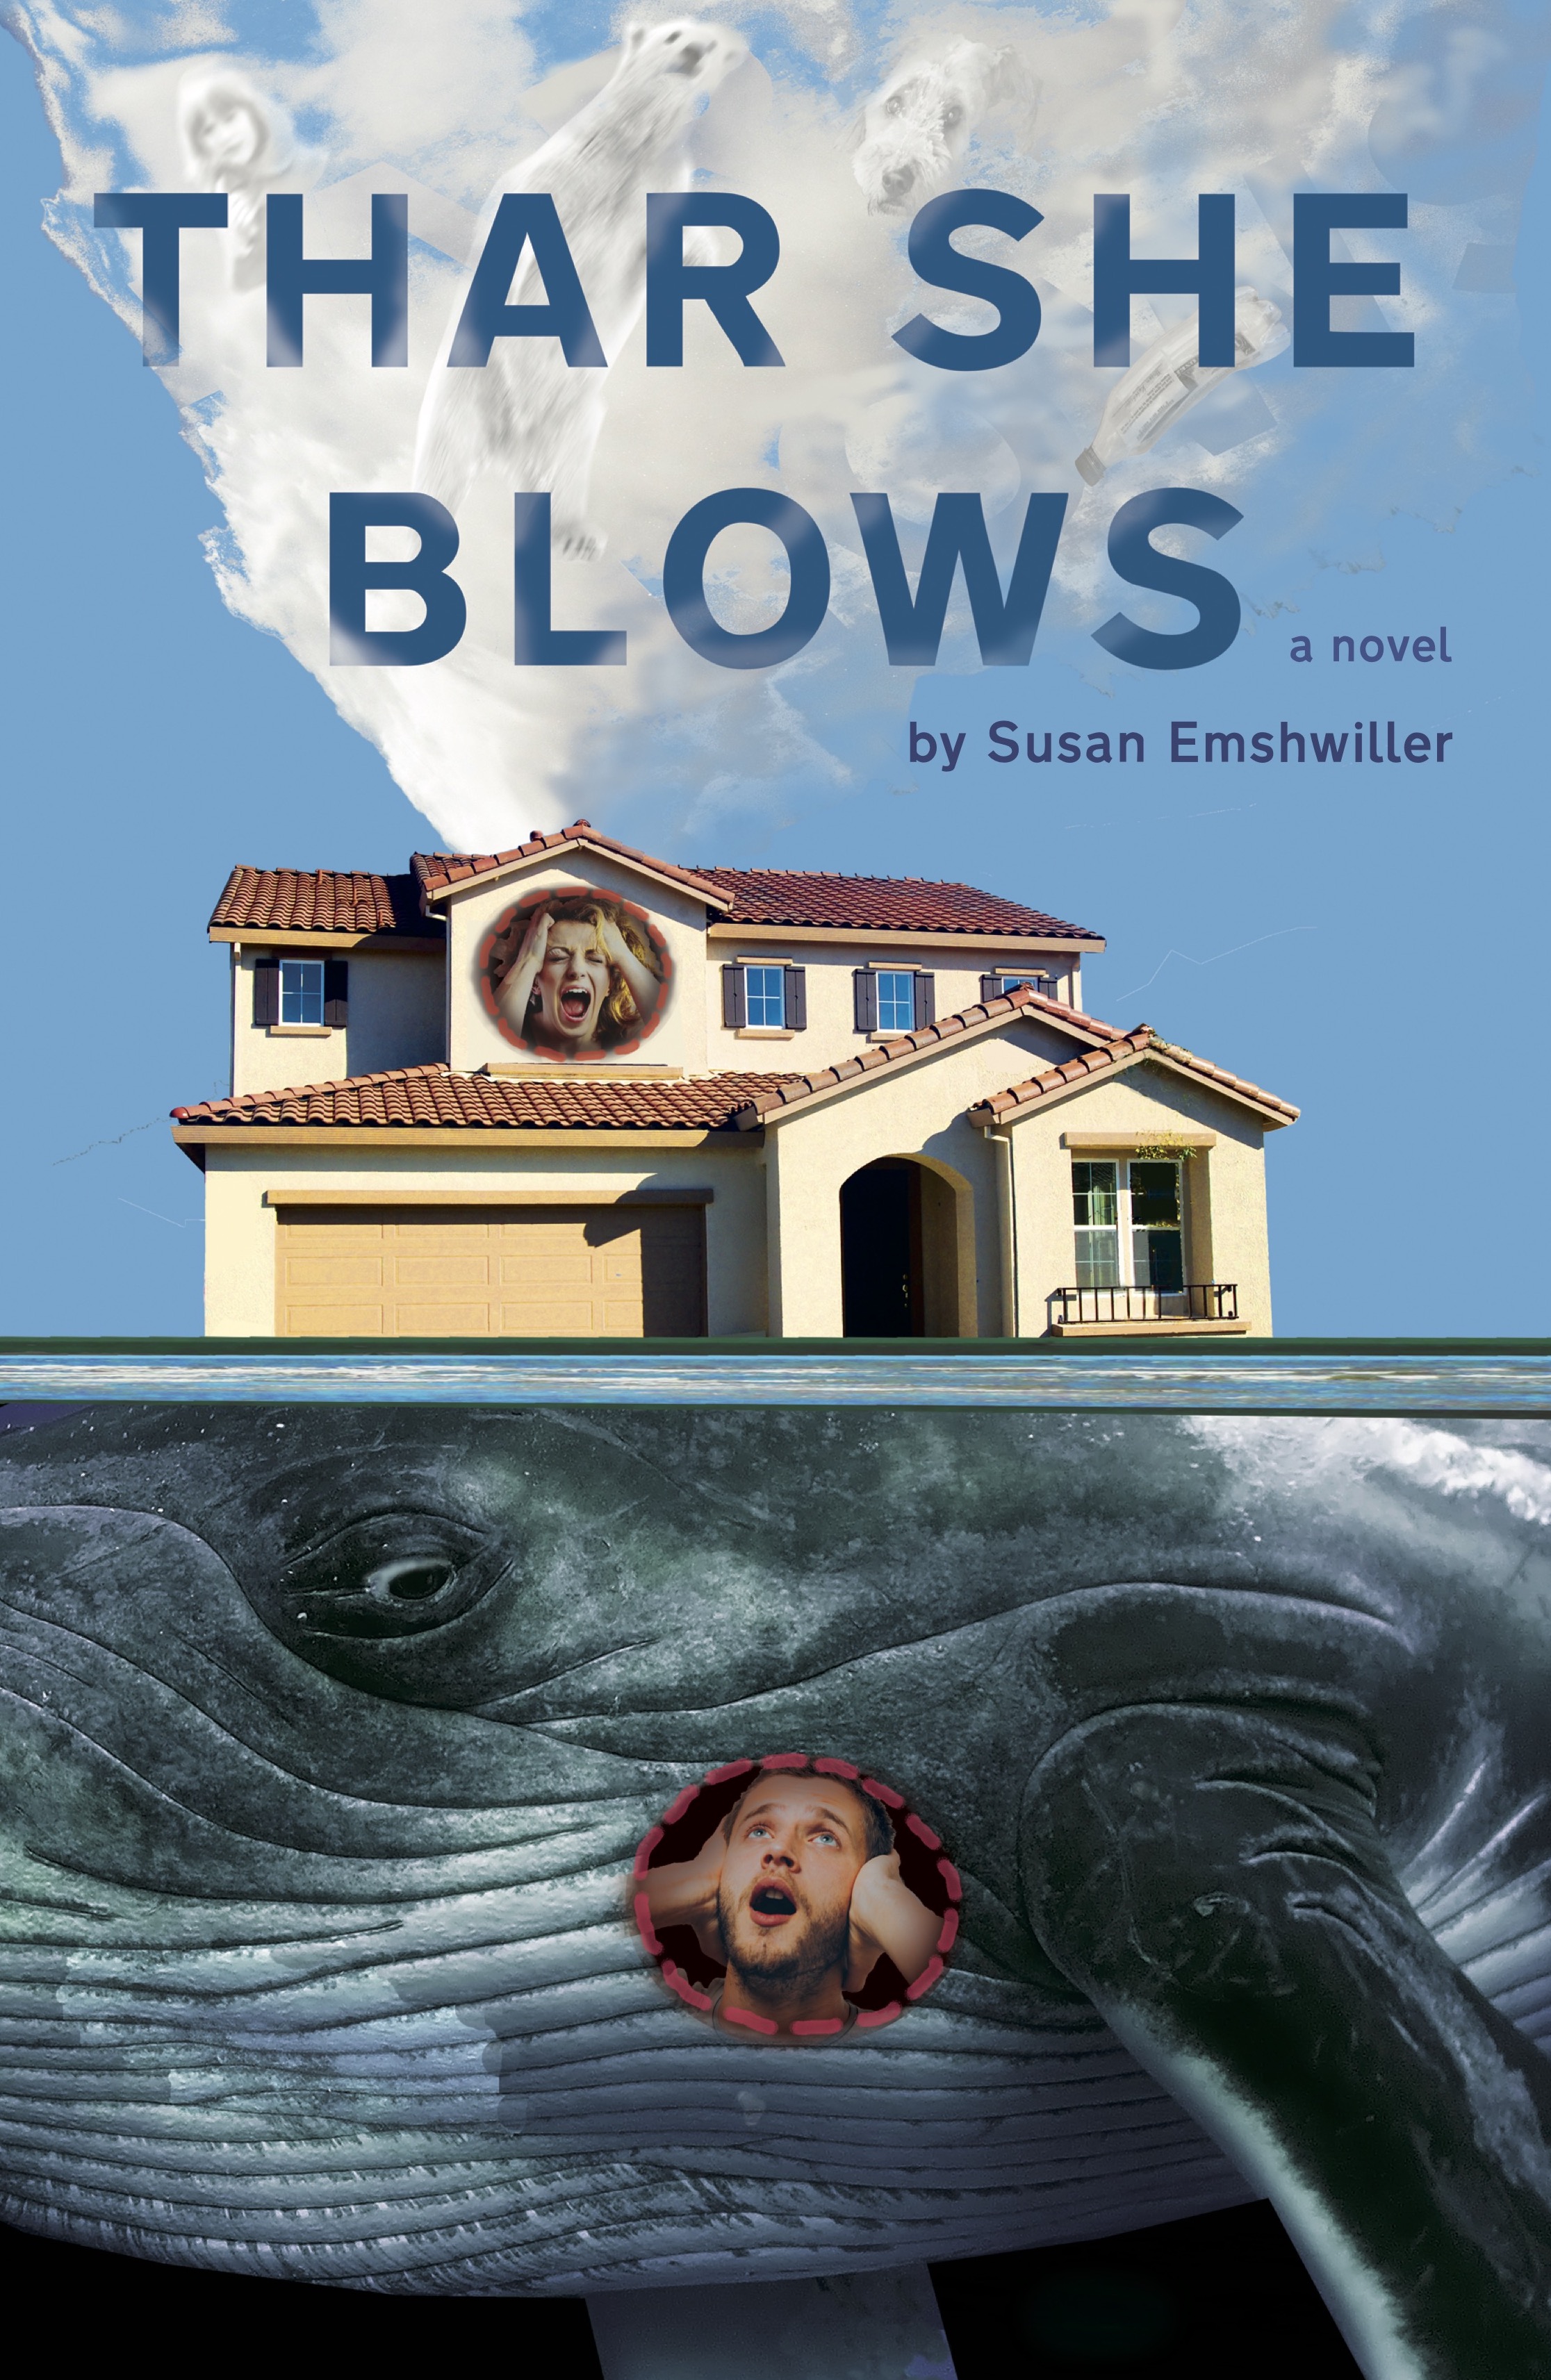 Screenwriter, Playwright Susan Emshwiller Dives in with Debut Novel "Thar She Blows"